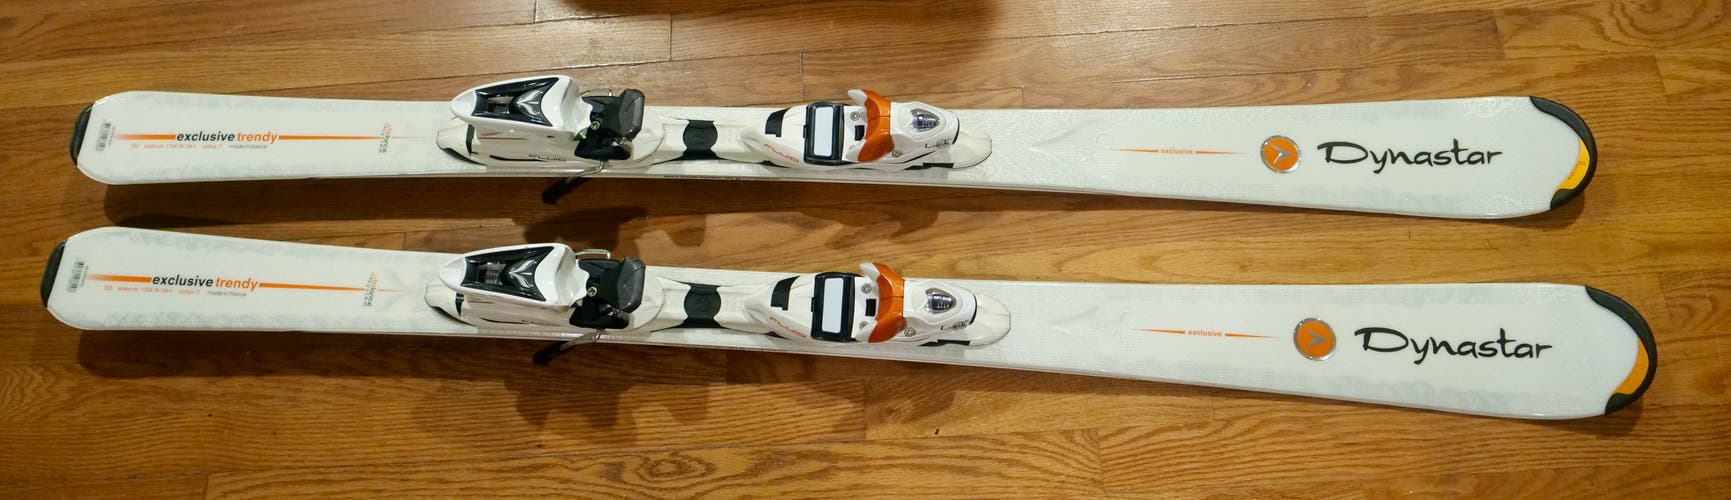 Used Women's Dynastar 153 cm All Mountain Exclusive Trendy Skis With Bindings